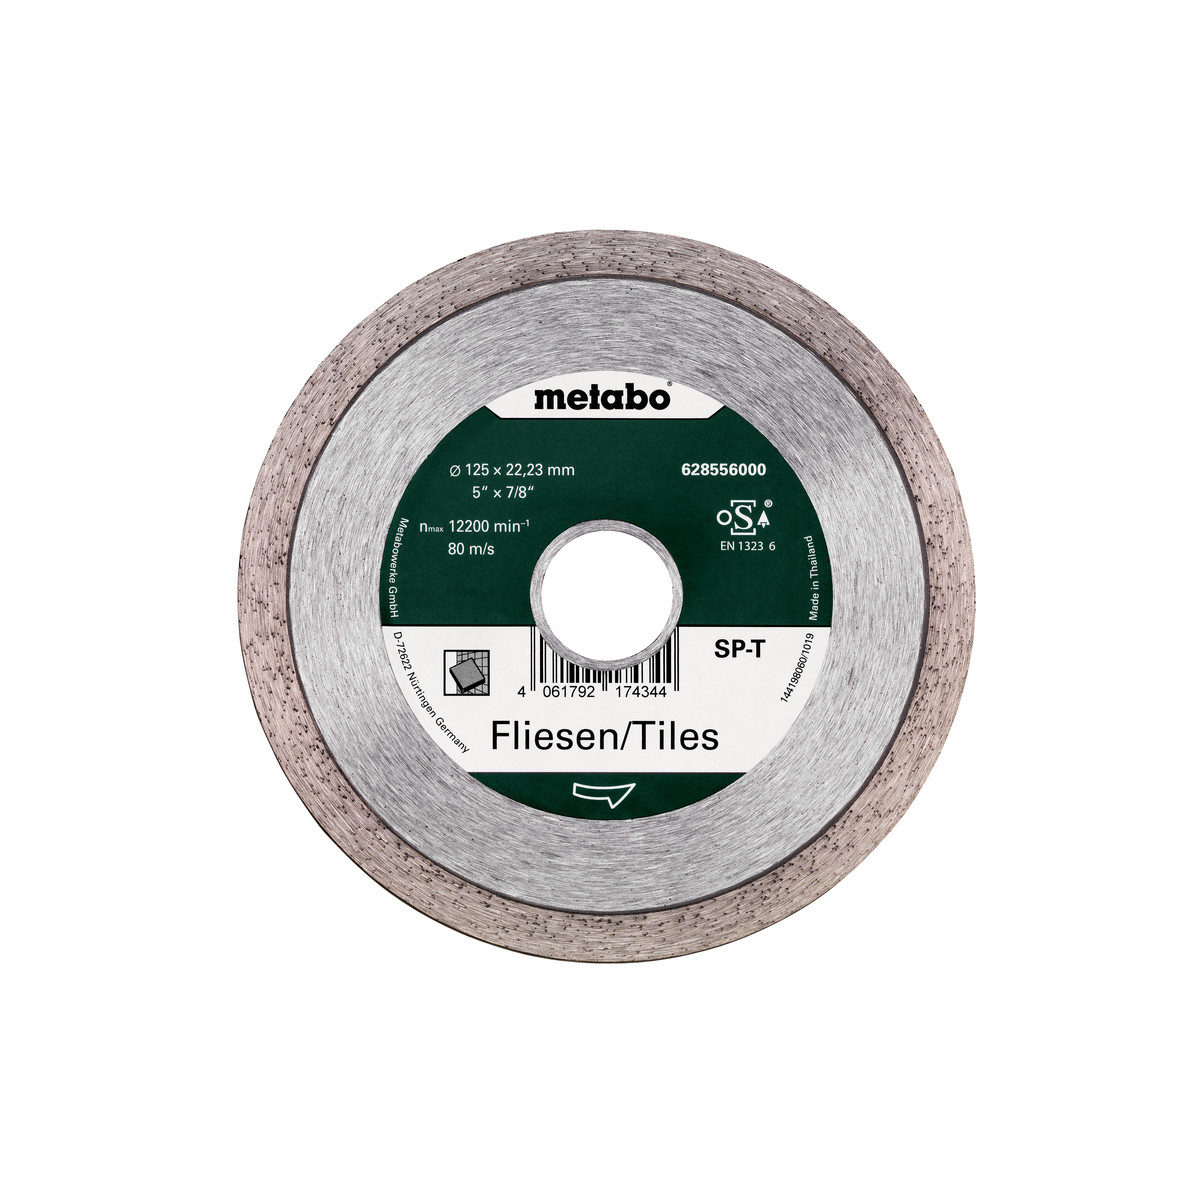 https://www.toomanytools.com/17551-thickbox_default/metabo-disque-o125mm-a-tronconner-le-carrelage-628556000.jpg